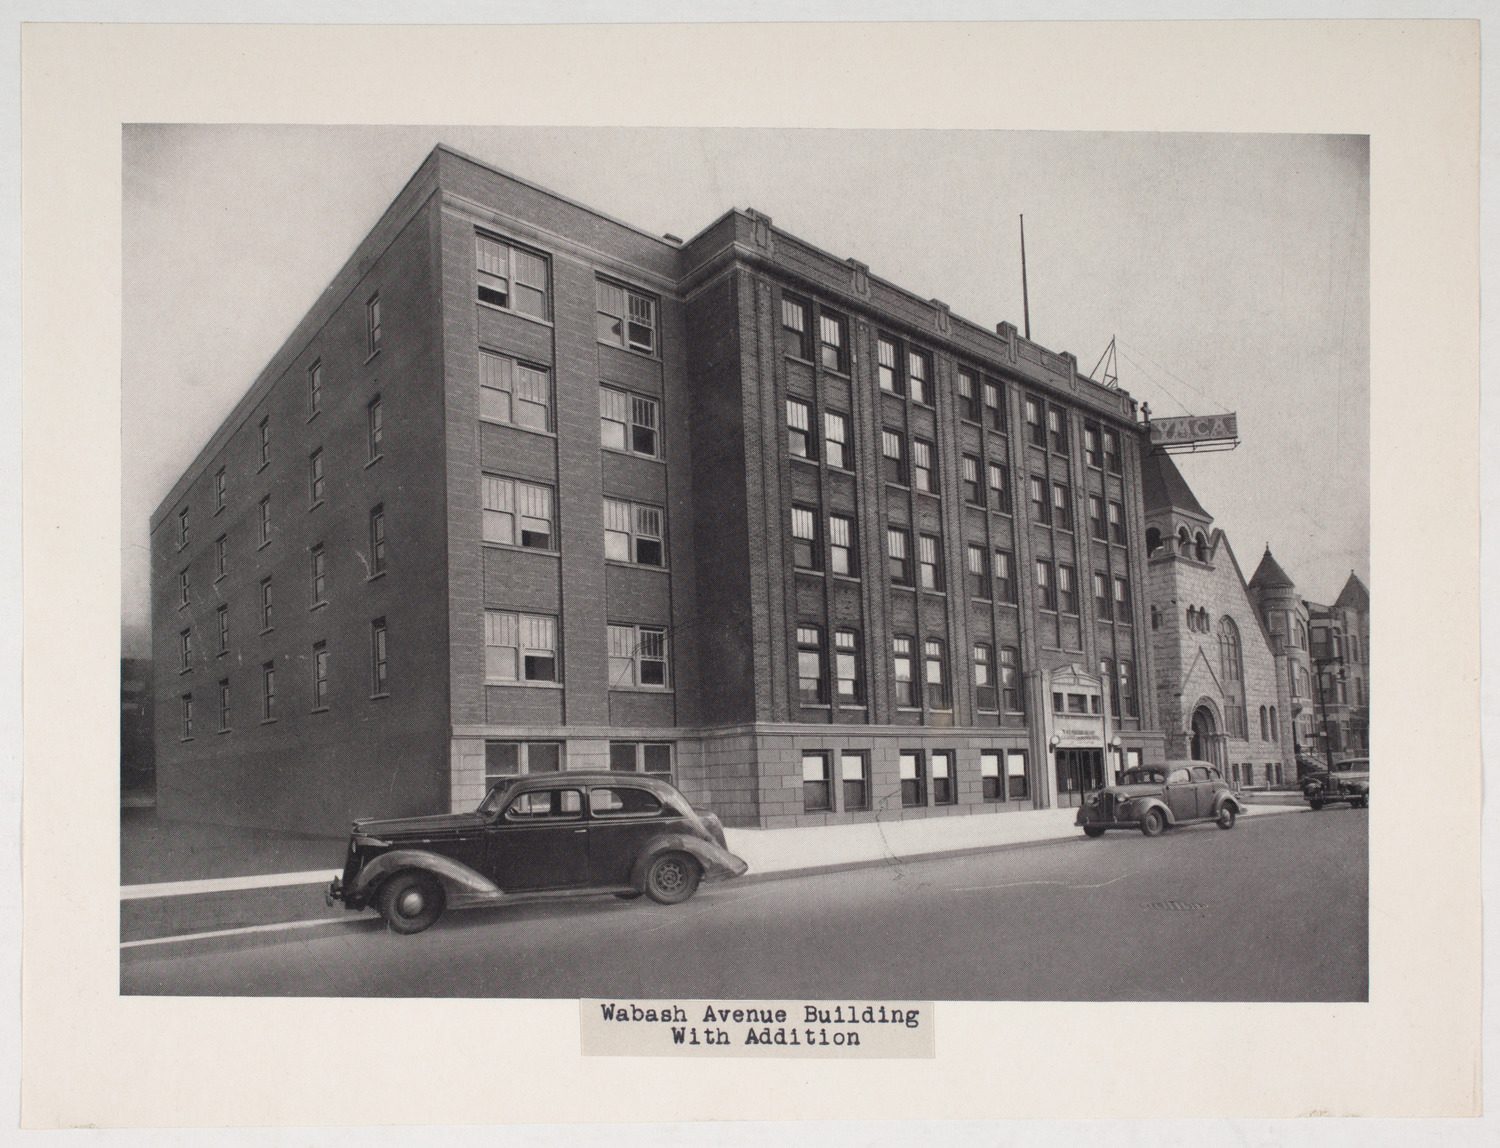 Exterior view of YMCA of Metropolitan Chicago Wabash Avenue Building with addition in the Douglas community area of Chicago, circa 1940